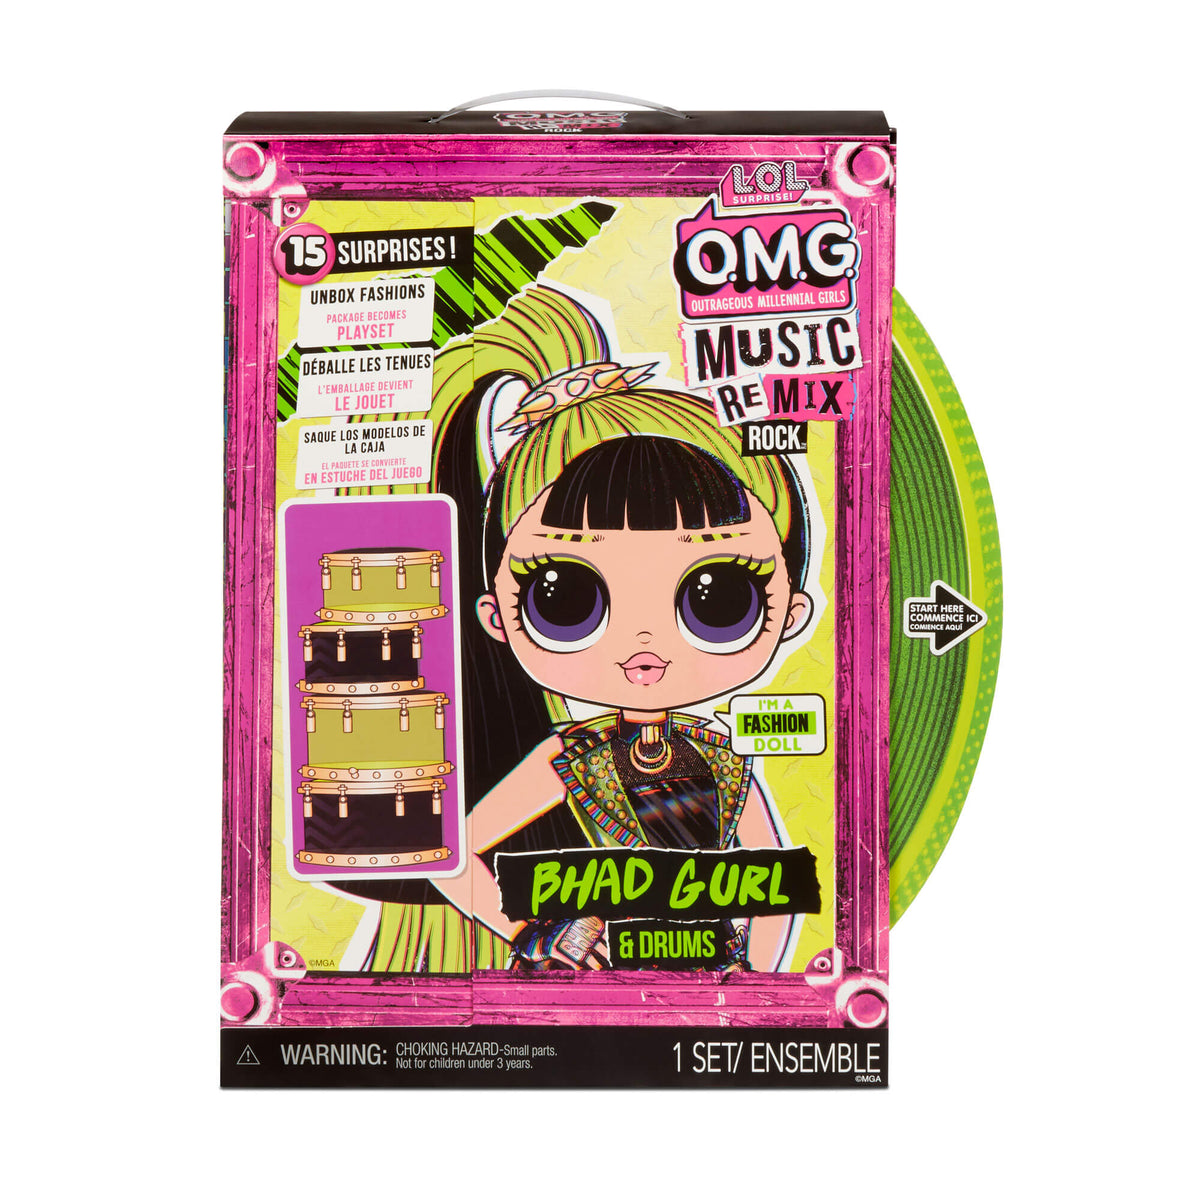 OMG Remix Rock Bhad Gurl Drums 15 Surprises – The MGA Shop